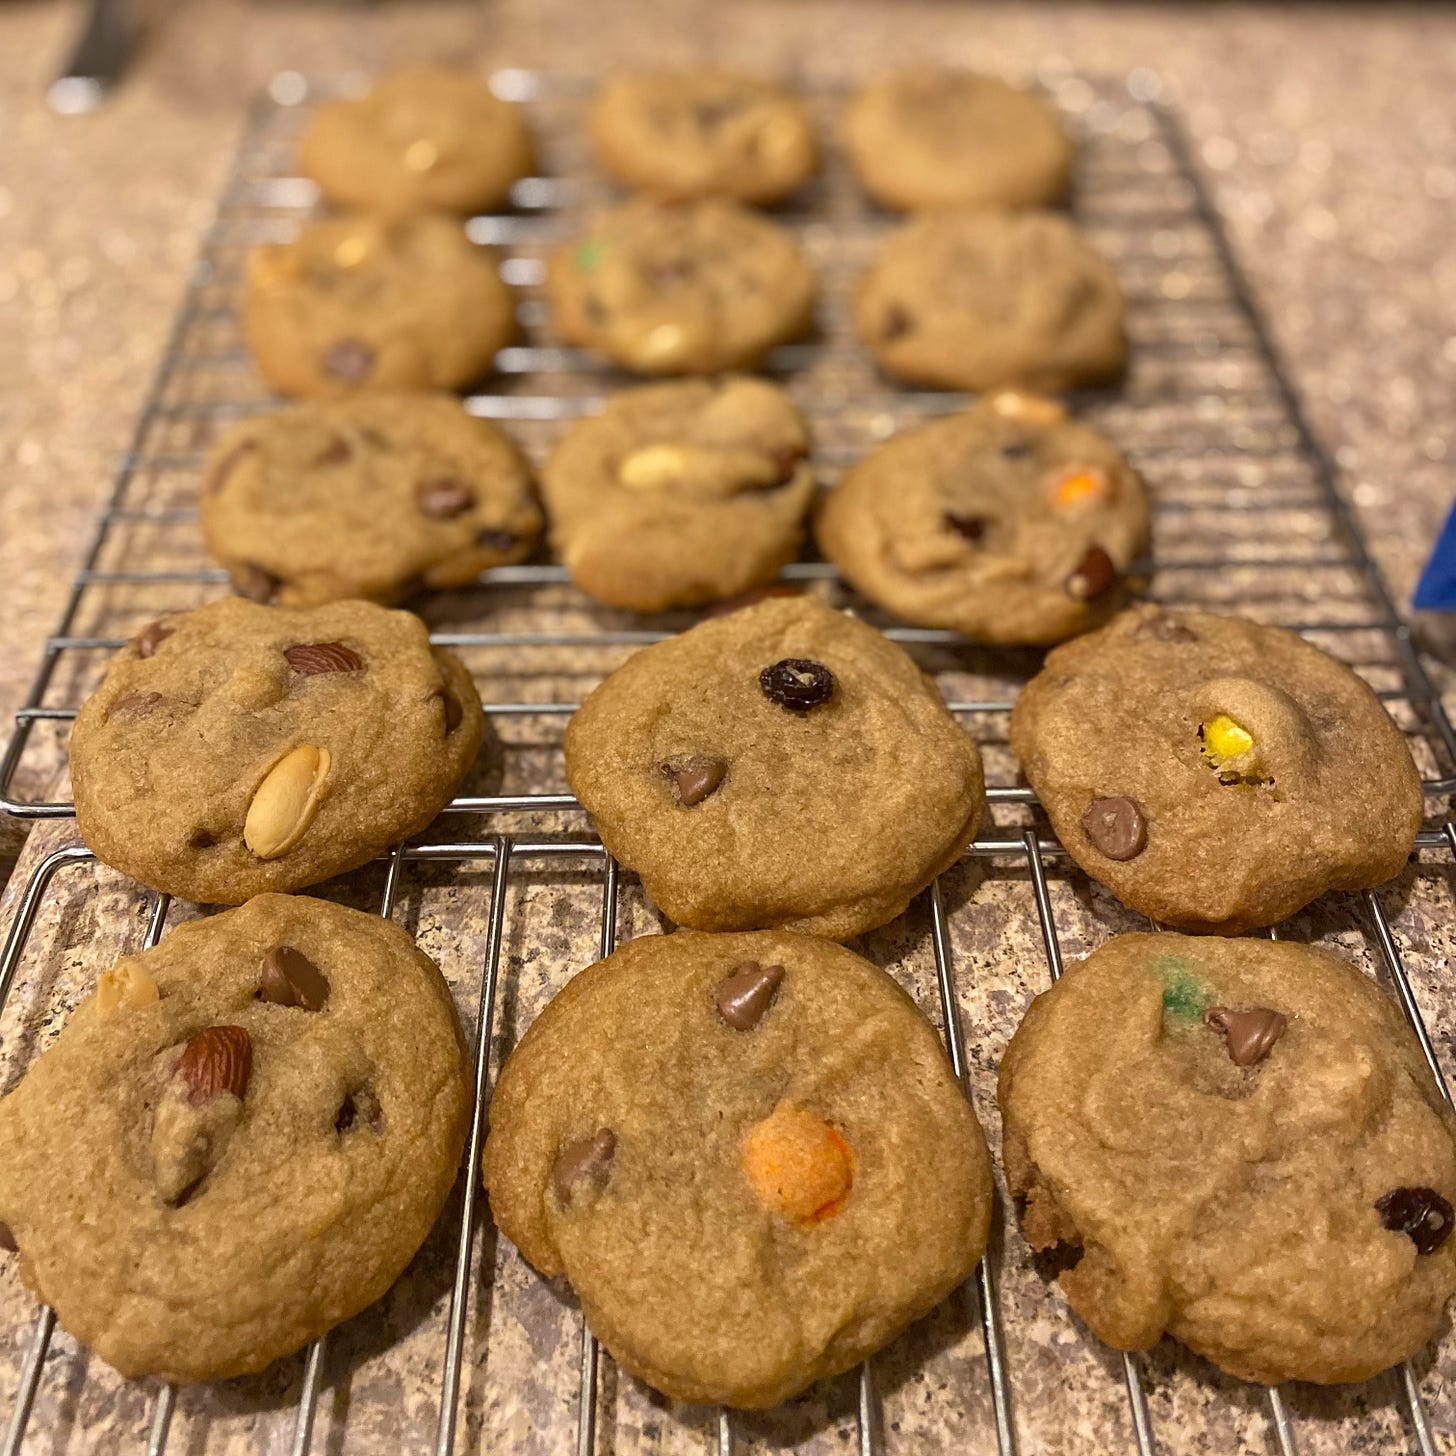 On a cooling rack, cookies with chocolate chips, M&Ms, and nuts.